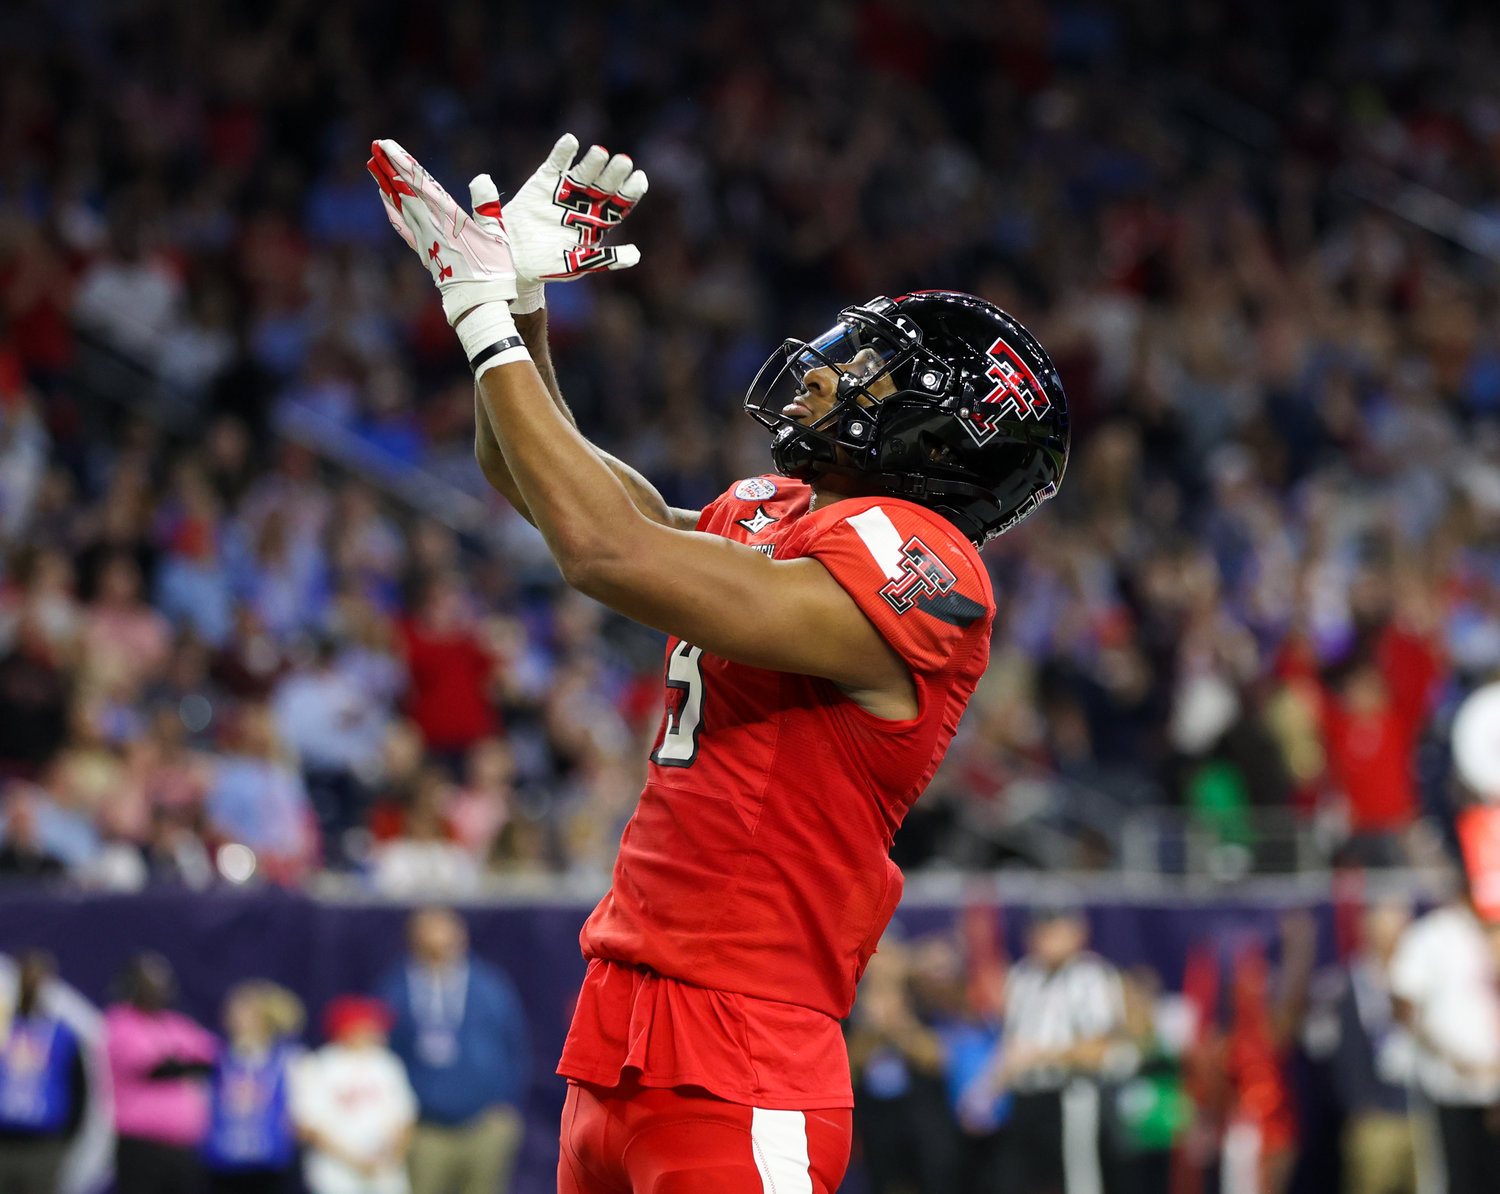 Texas Tech wide receiver Jerand Bradley (9) gestures to the crowd after a 2nd quarter touchdown catch during the TaxAct Texas Bowl on Dec. 28, 2022 in Houston.